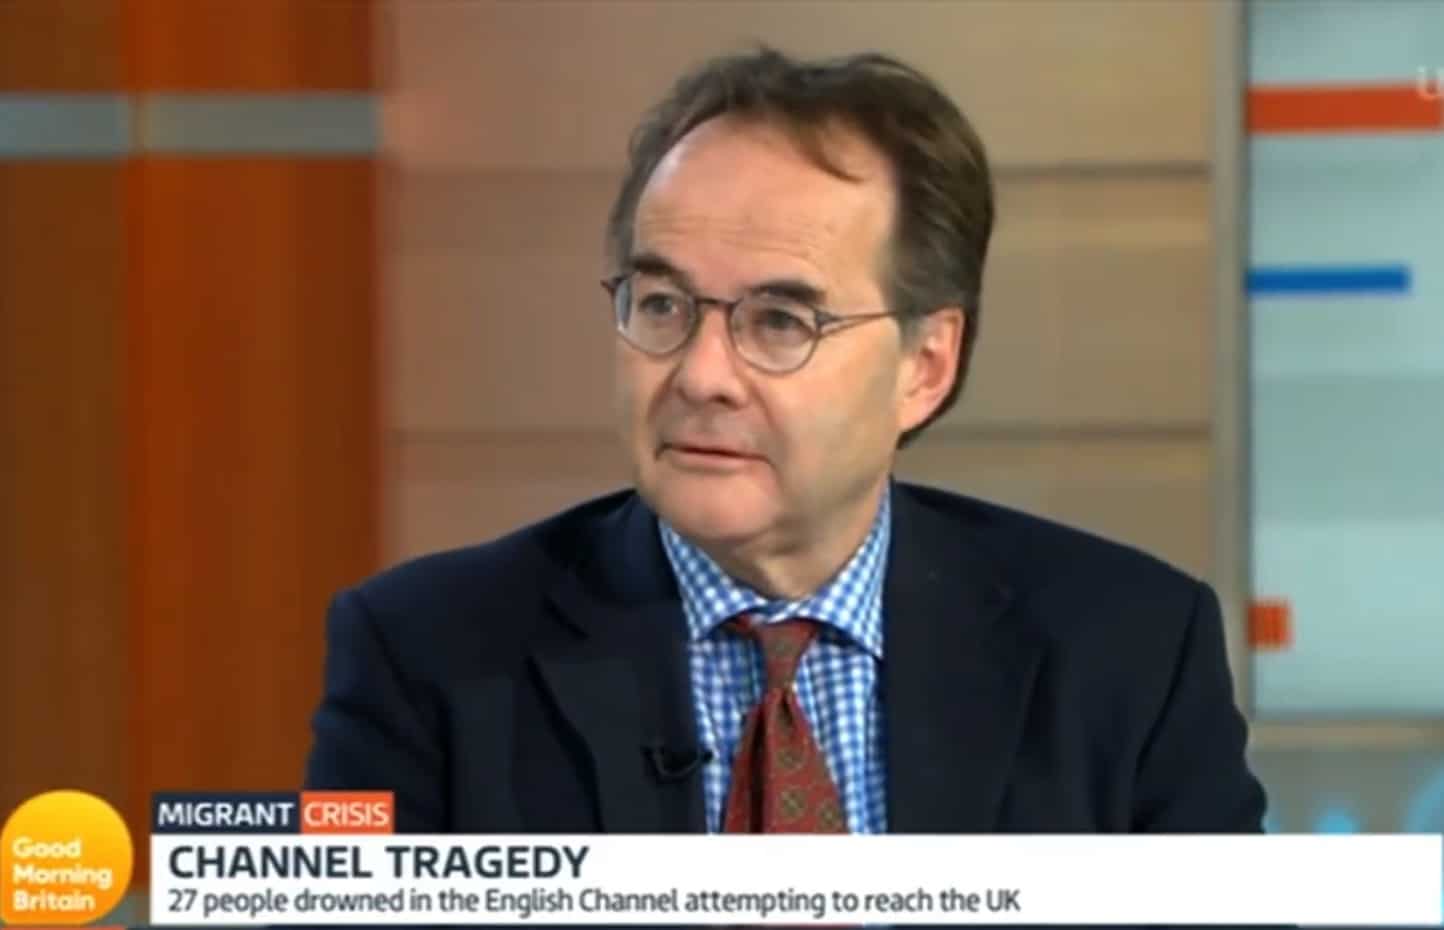 Quentin Letts says migrants only come to UK for ‘jobs and benefits’